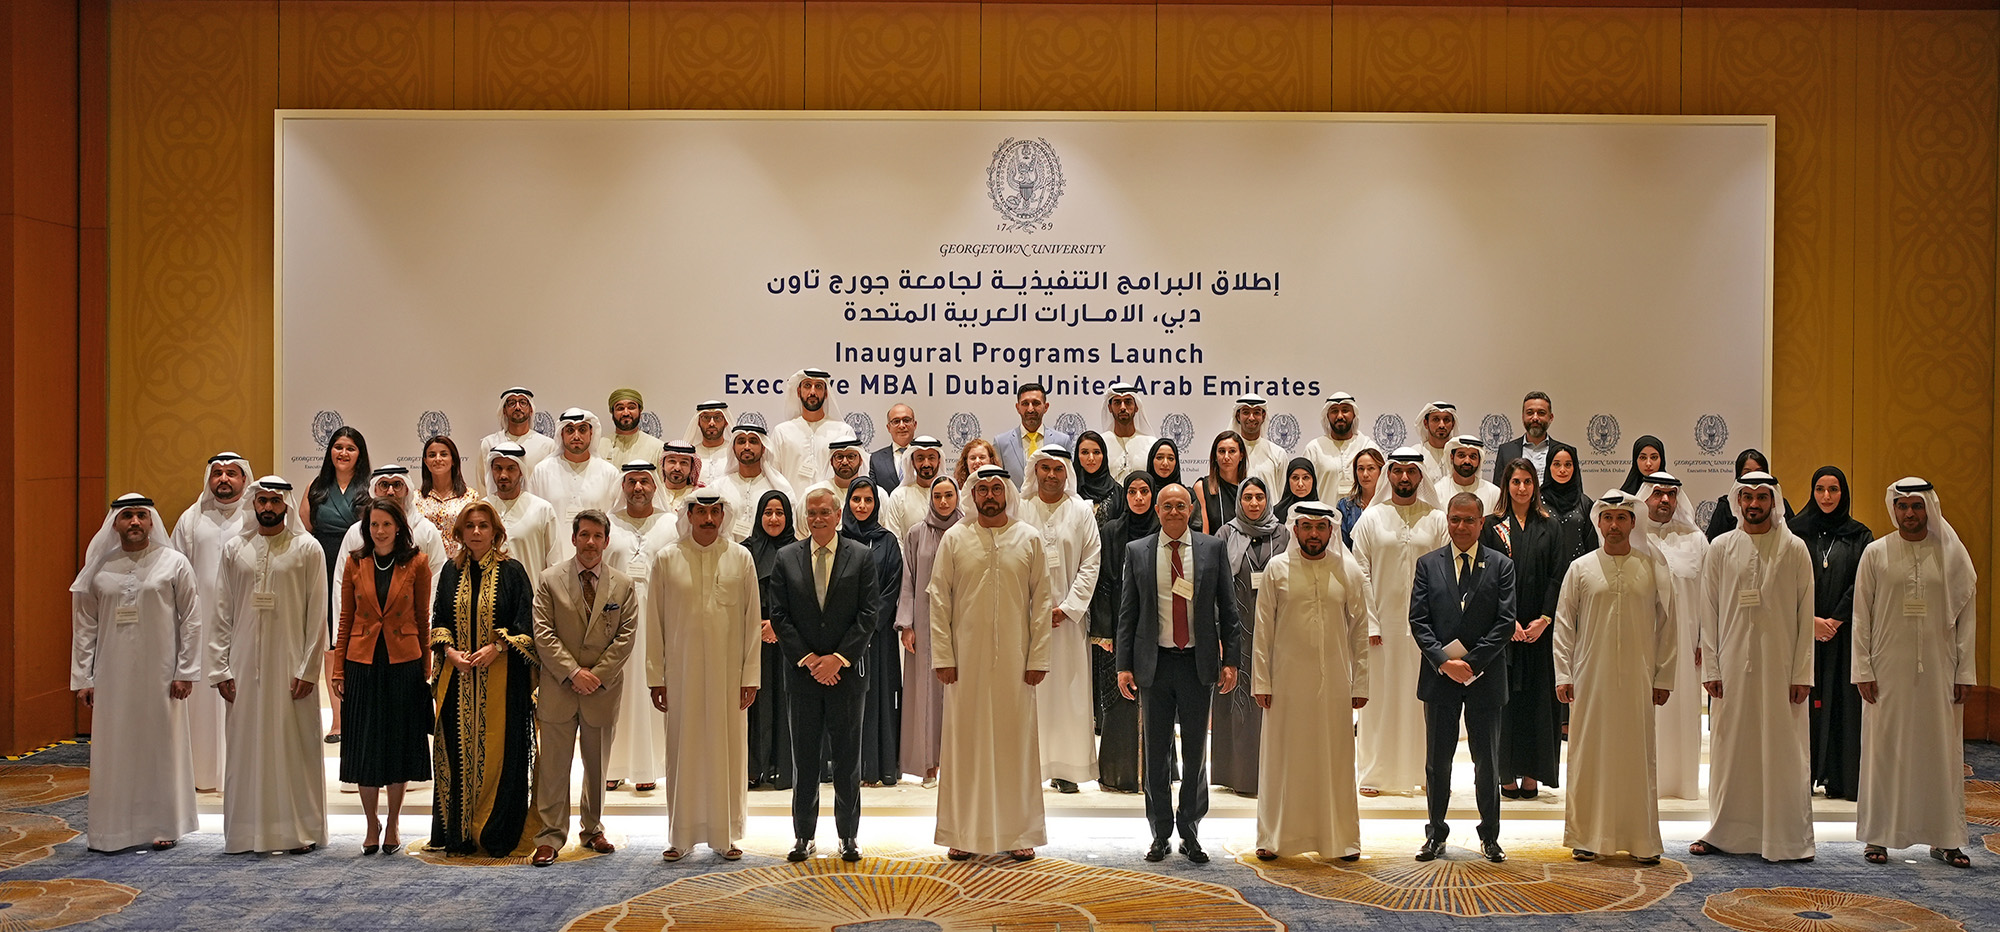 HE Gergawi, Minister Cabinet Affairs, joined by Georgetown University Executive MBA Dubai Inaugural Class